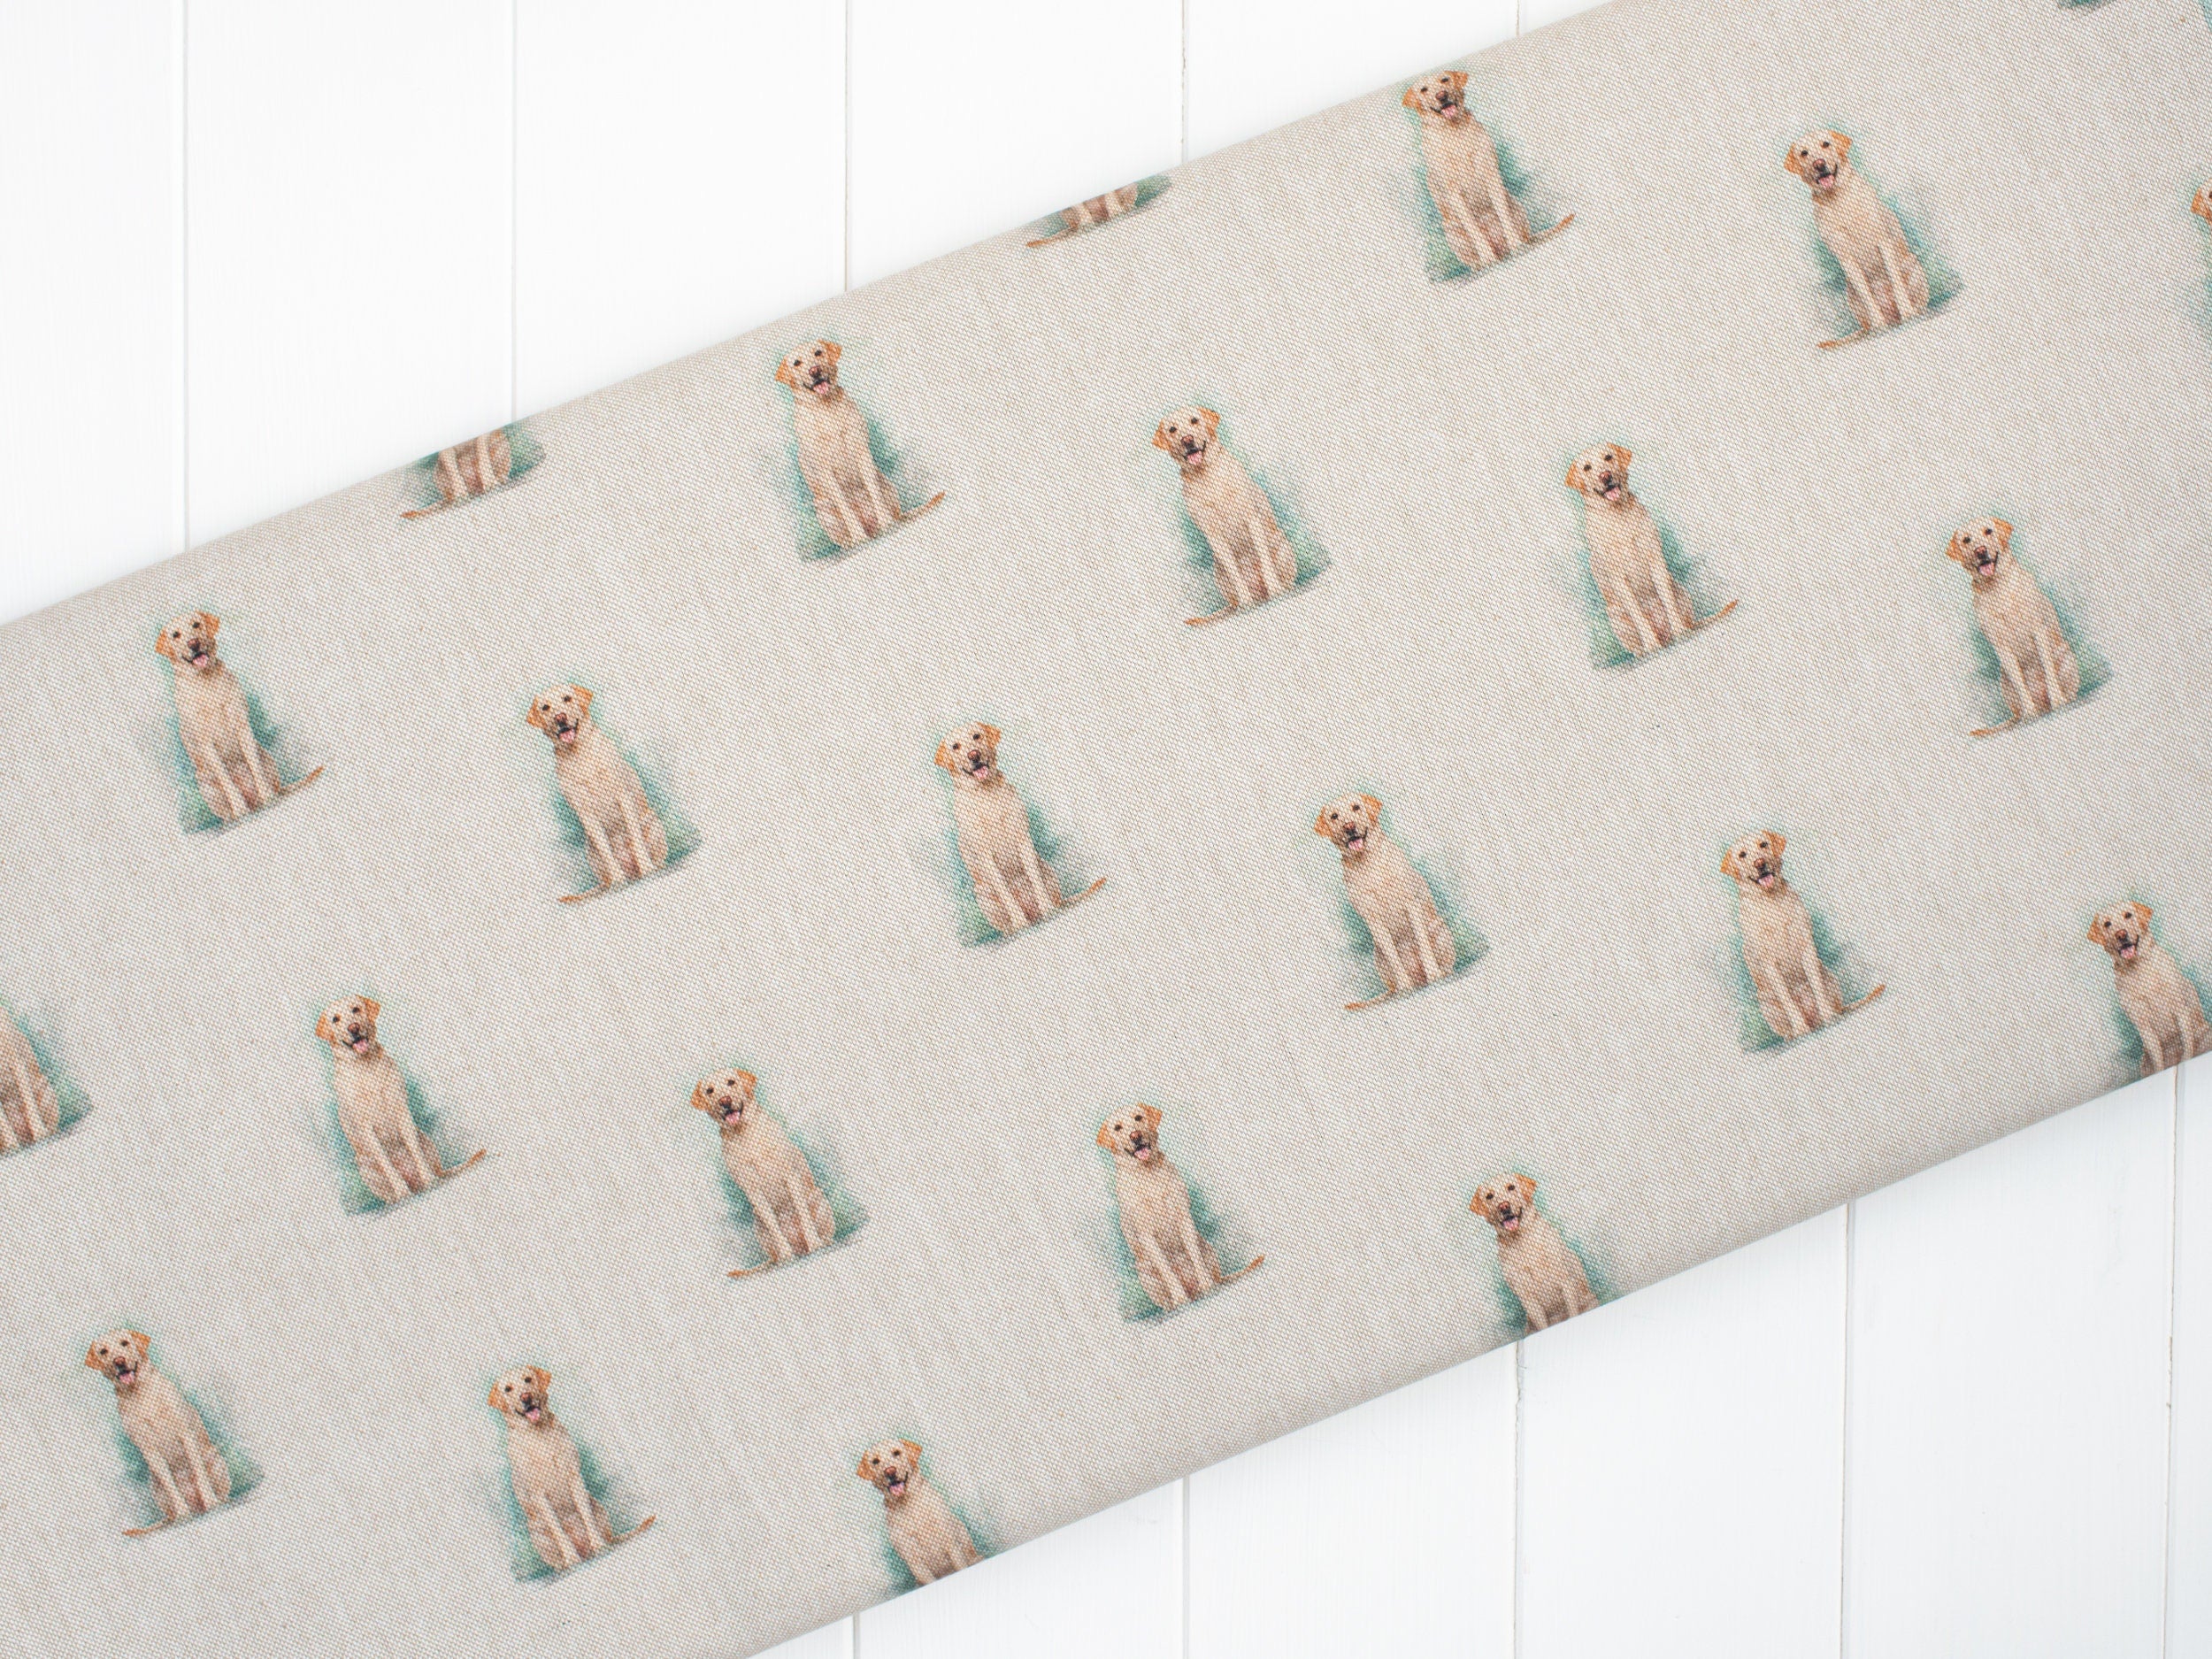 Digitally printed labrador dog on a cotton rich linen look wide fabric 